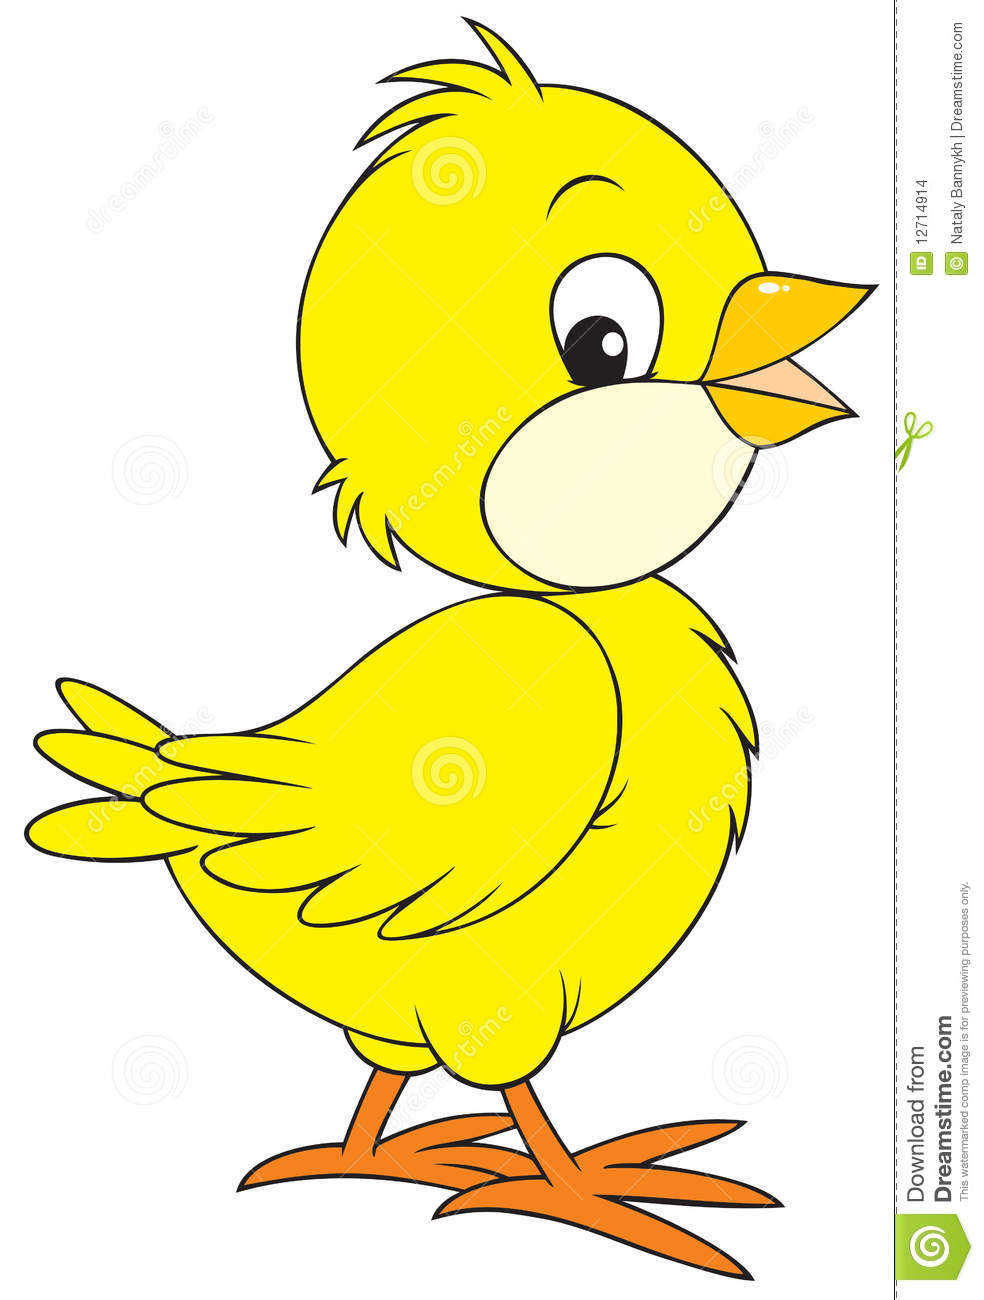 The Clip Art Of The Small Yellow Chick 